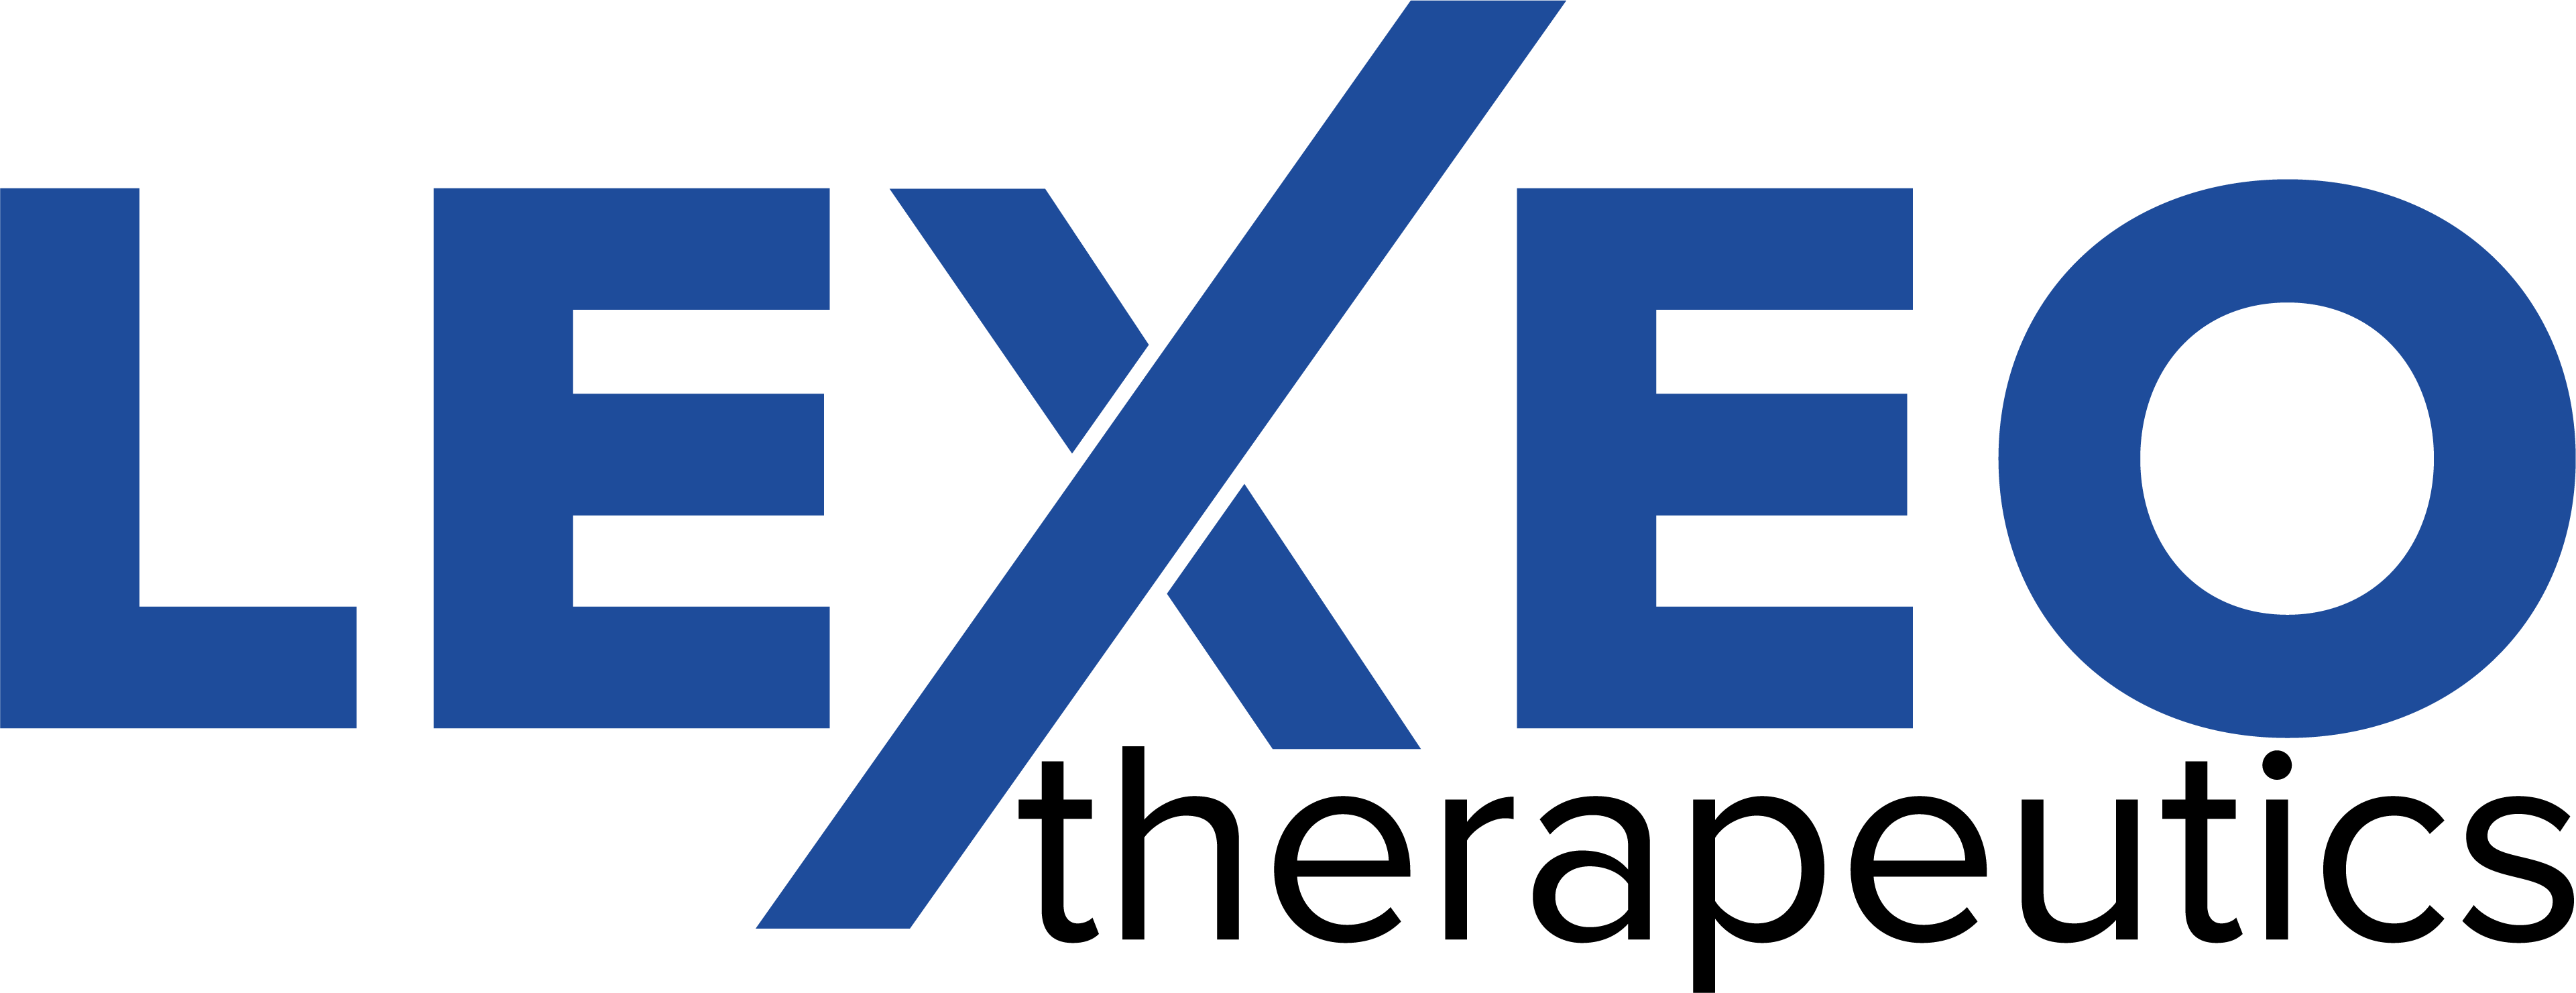 LEXEO Therapeutics logo Cure Collaboration Residency